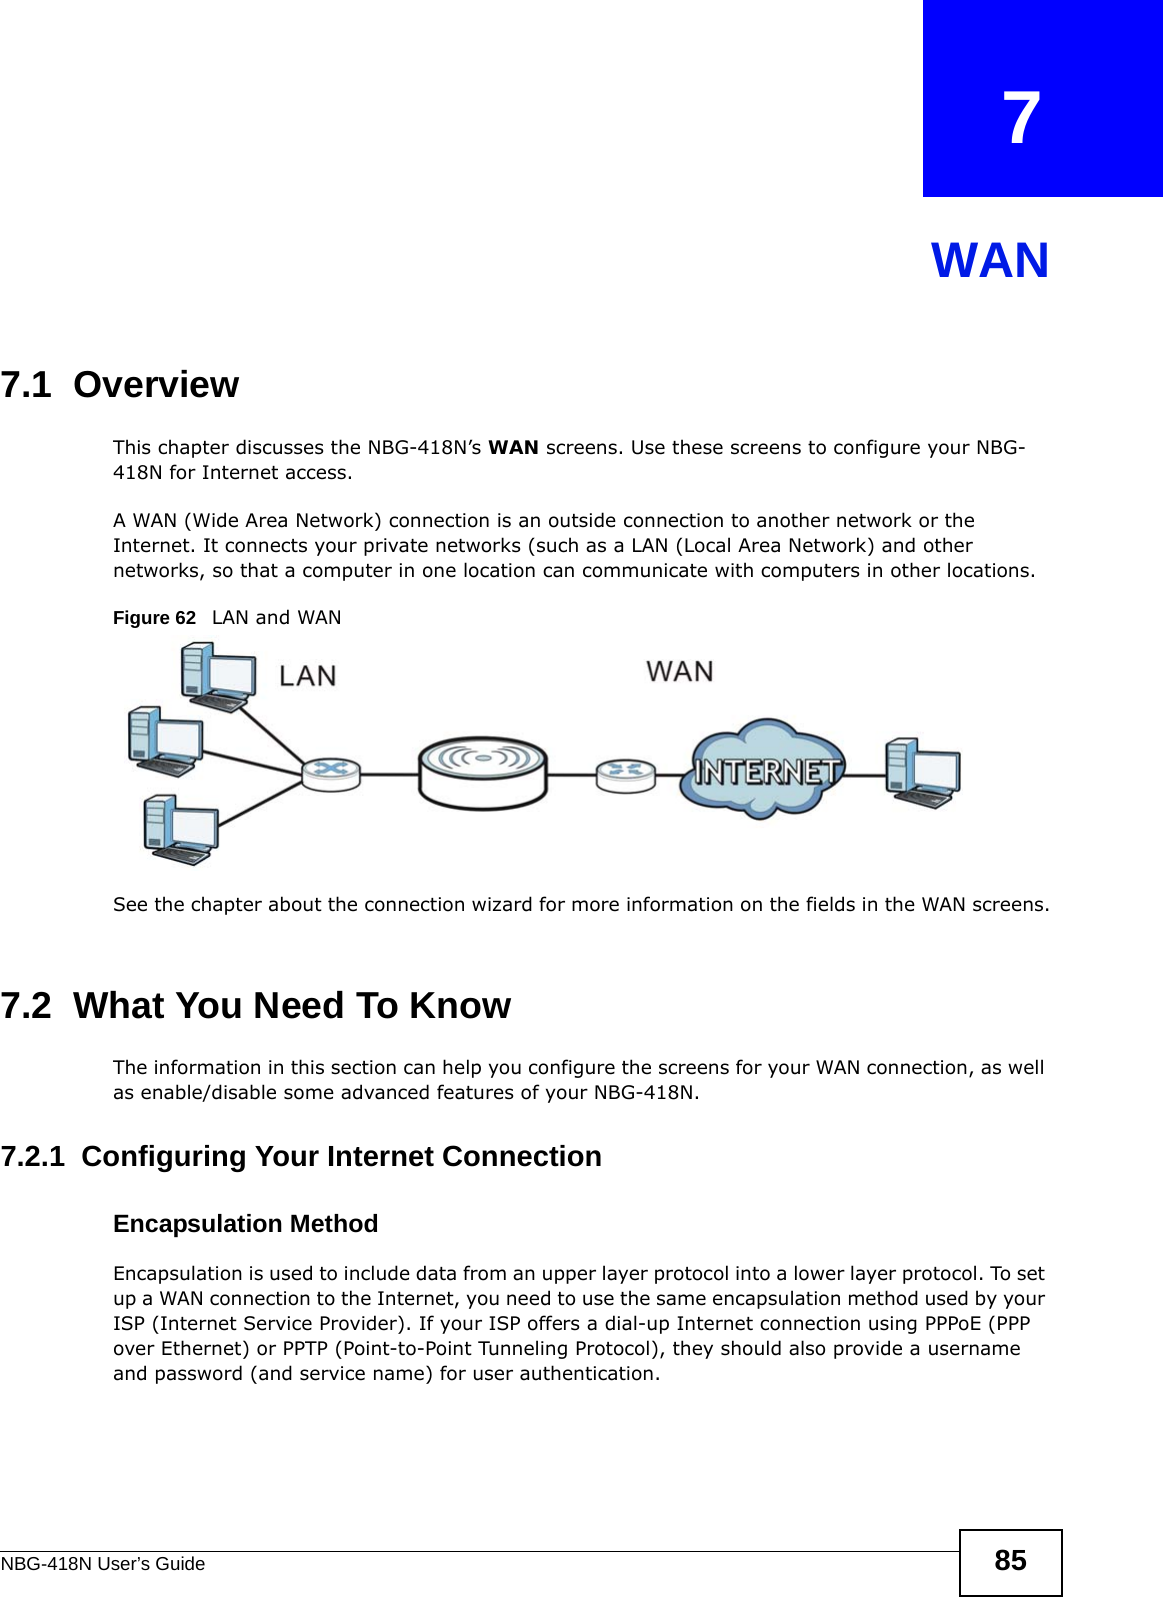 NBG-418N User’s Guide 85CHAPTER   7WAN7.1  OverviewThis chapter discusses the NBG-418N’s WAN screens. Use these screens to configure your NBG-418N for Internet access.A WAN (Wide Area Network) connection is an outside connection to another network or the Internet. It connects your private networks (such as a LAN (Local Area Network) and other networks, so that a computer in one location can communicate with computers in other locations.Figure 62   LAN and WANSee the chapter about the connection wizard for more information on the fields in the WAN screens.7.2  What You Need To KnowThe information in this section can help you configure the screens for your WAN connection, as well as enable/disable some advanced features of your NBG-418N.7.2.1  Configuring Your Internet ConnectionEncapsulation MethodEncapsulation is used to include data from an upper layer protocol into a lower layer protocol. To set up a WAN connection to the Internet, you need to use the same encapsulation method used by your ISP (Internet Service Provider). If your ISP offers a dial-up Internet connection using PPPoE (PPP over Ethernet) or PPTP (Point-to-Point Tunneling Protocol), they should also provide a username and password (and service name) for user authentication.